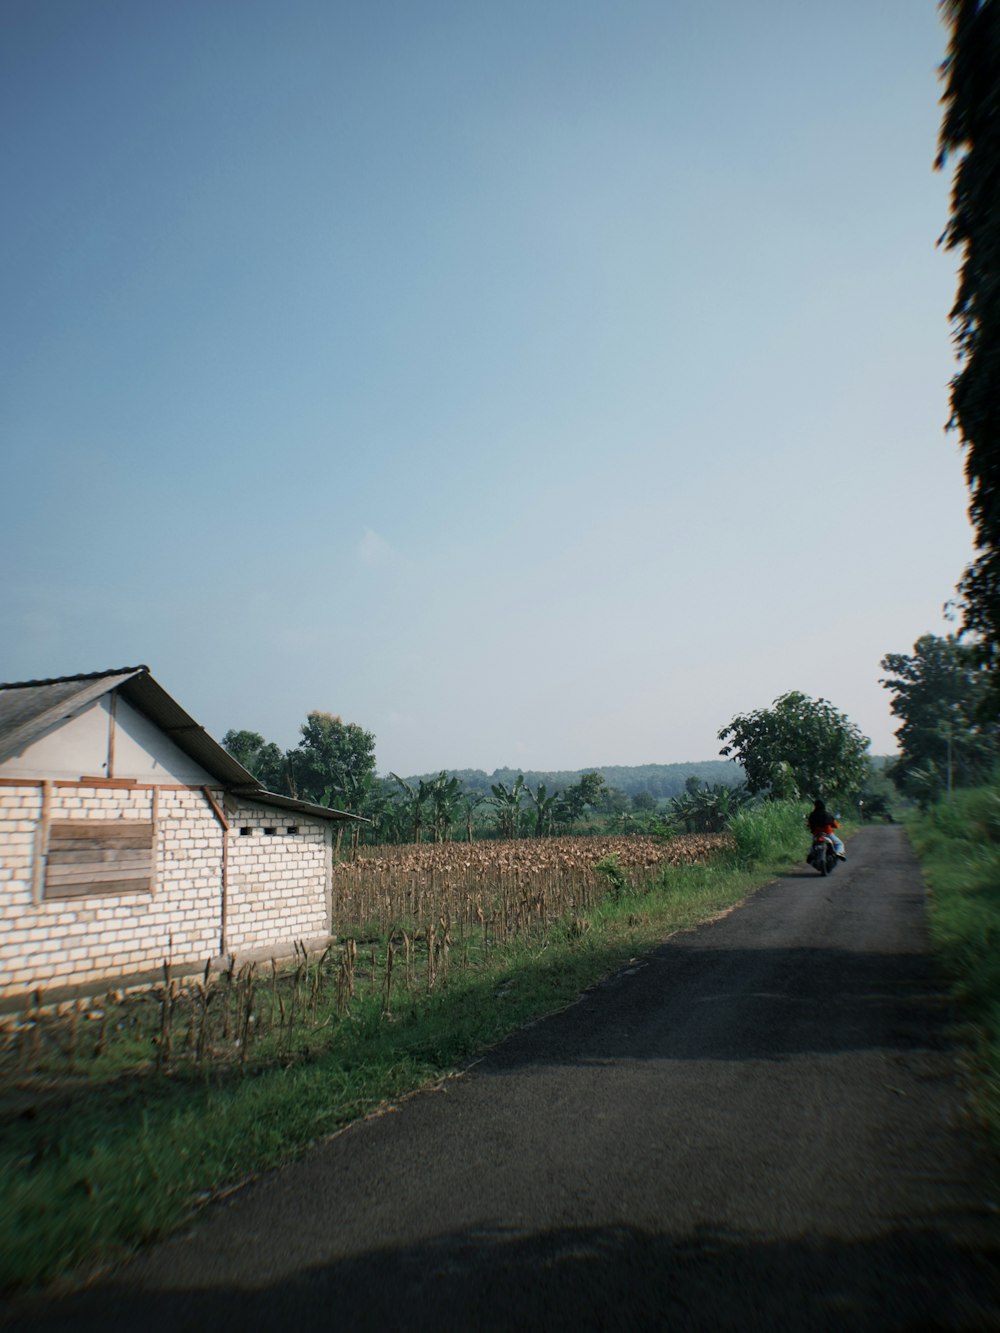 a person riding a motorcycle down a country road